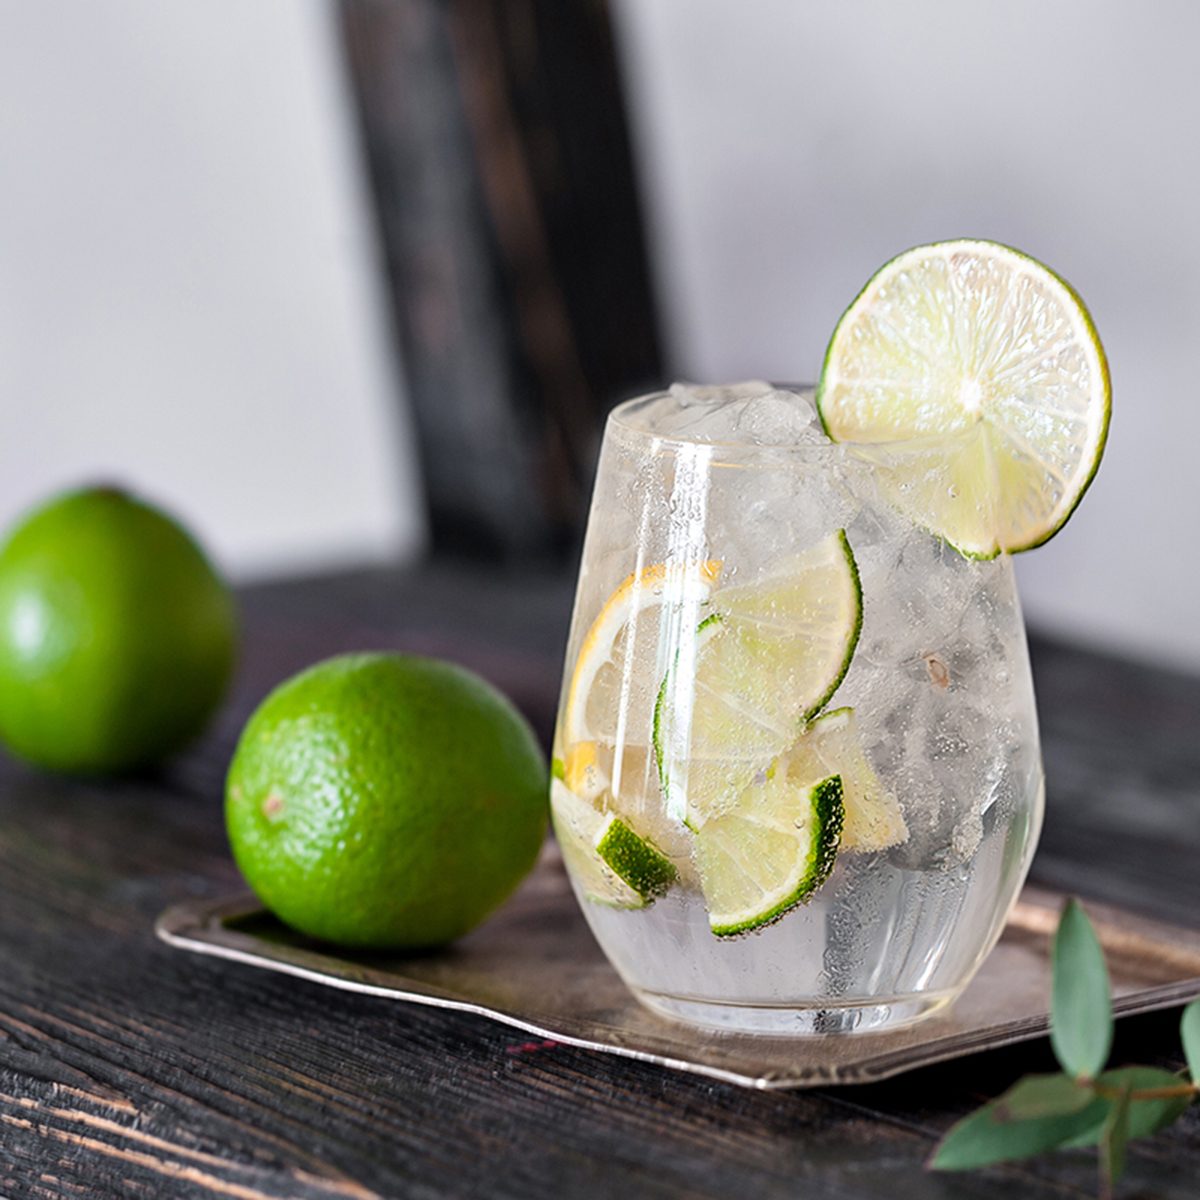 Cold cocktail with lime, lemon, tonic, vodka and ice on vintage background